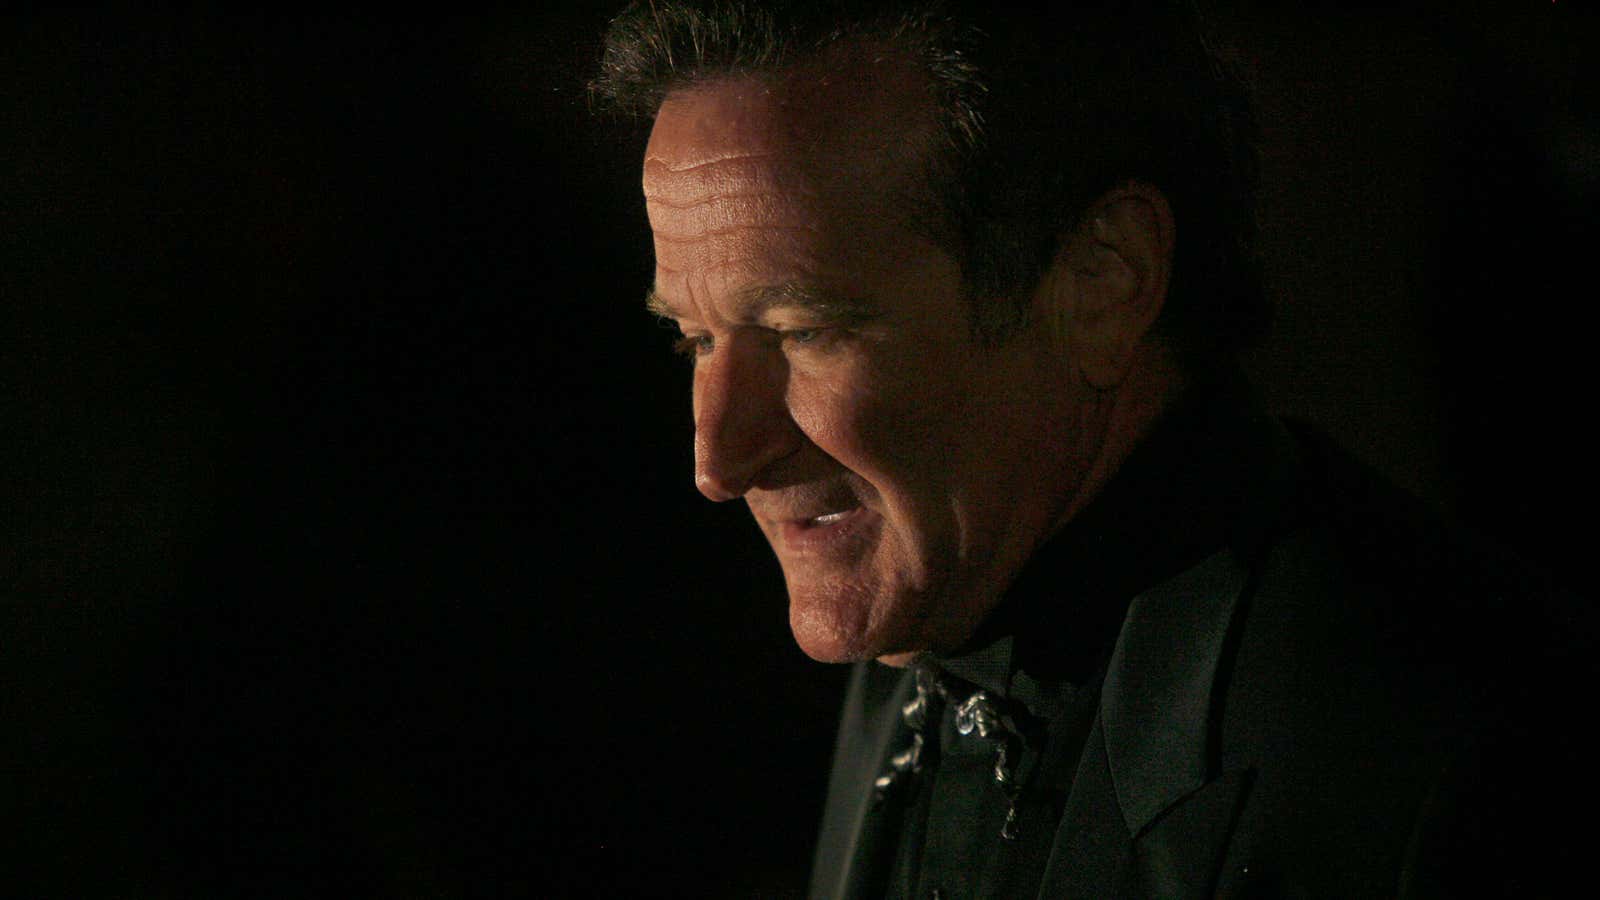 Robin Williams died after battling depression for decades.